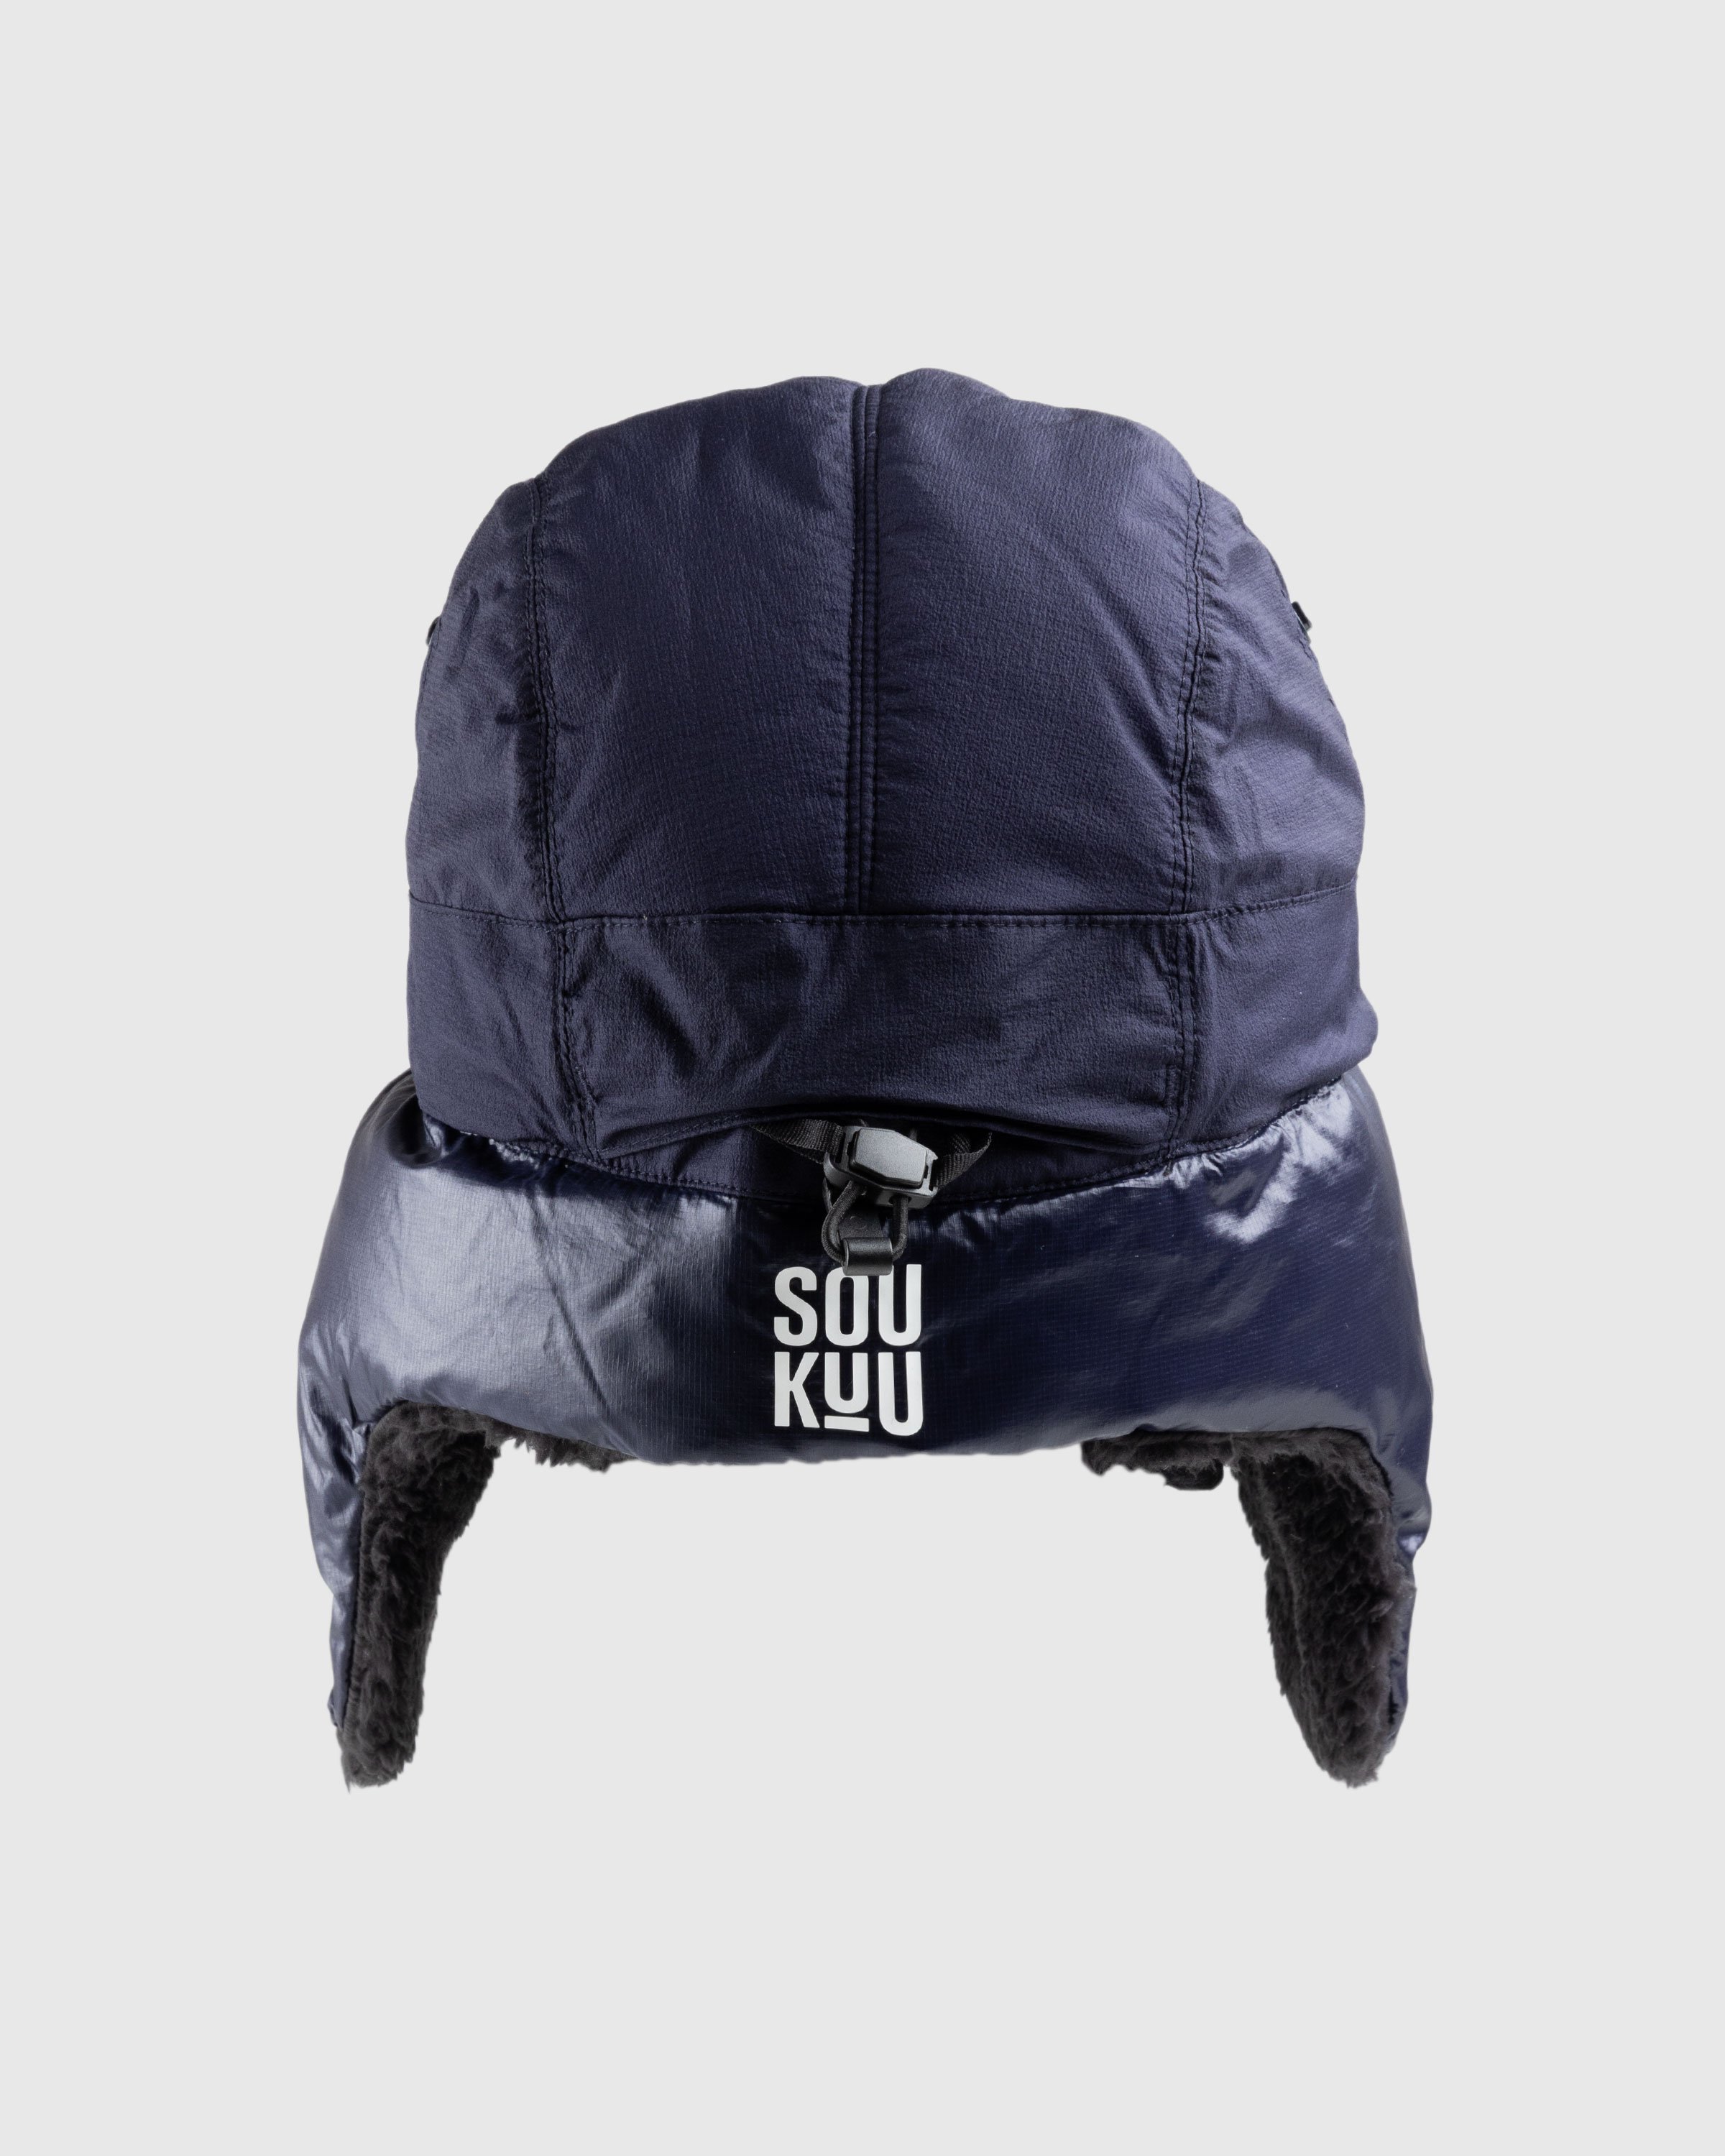 The North Face x UNDERCOVER - Soukuu Down Cap Black/Navy - Accessories - Multi - Image 2